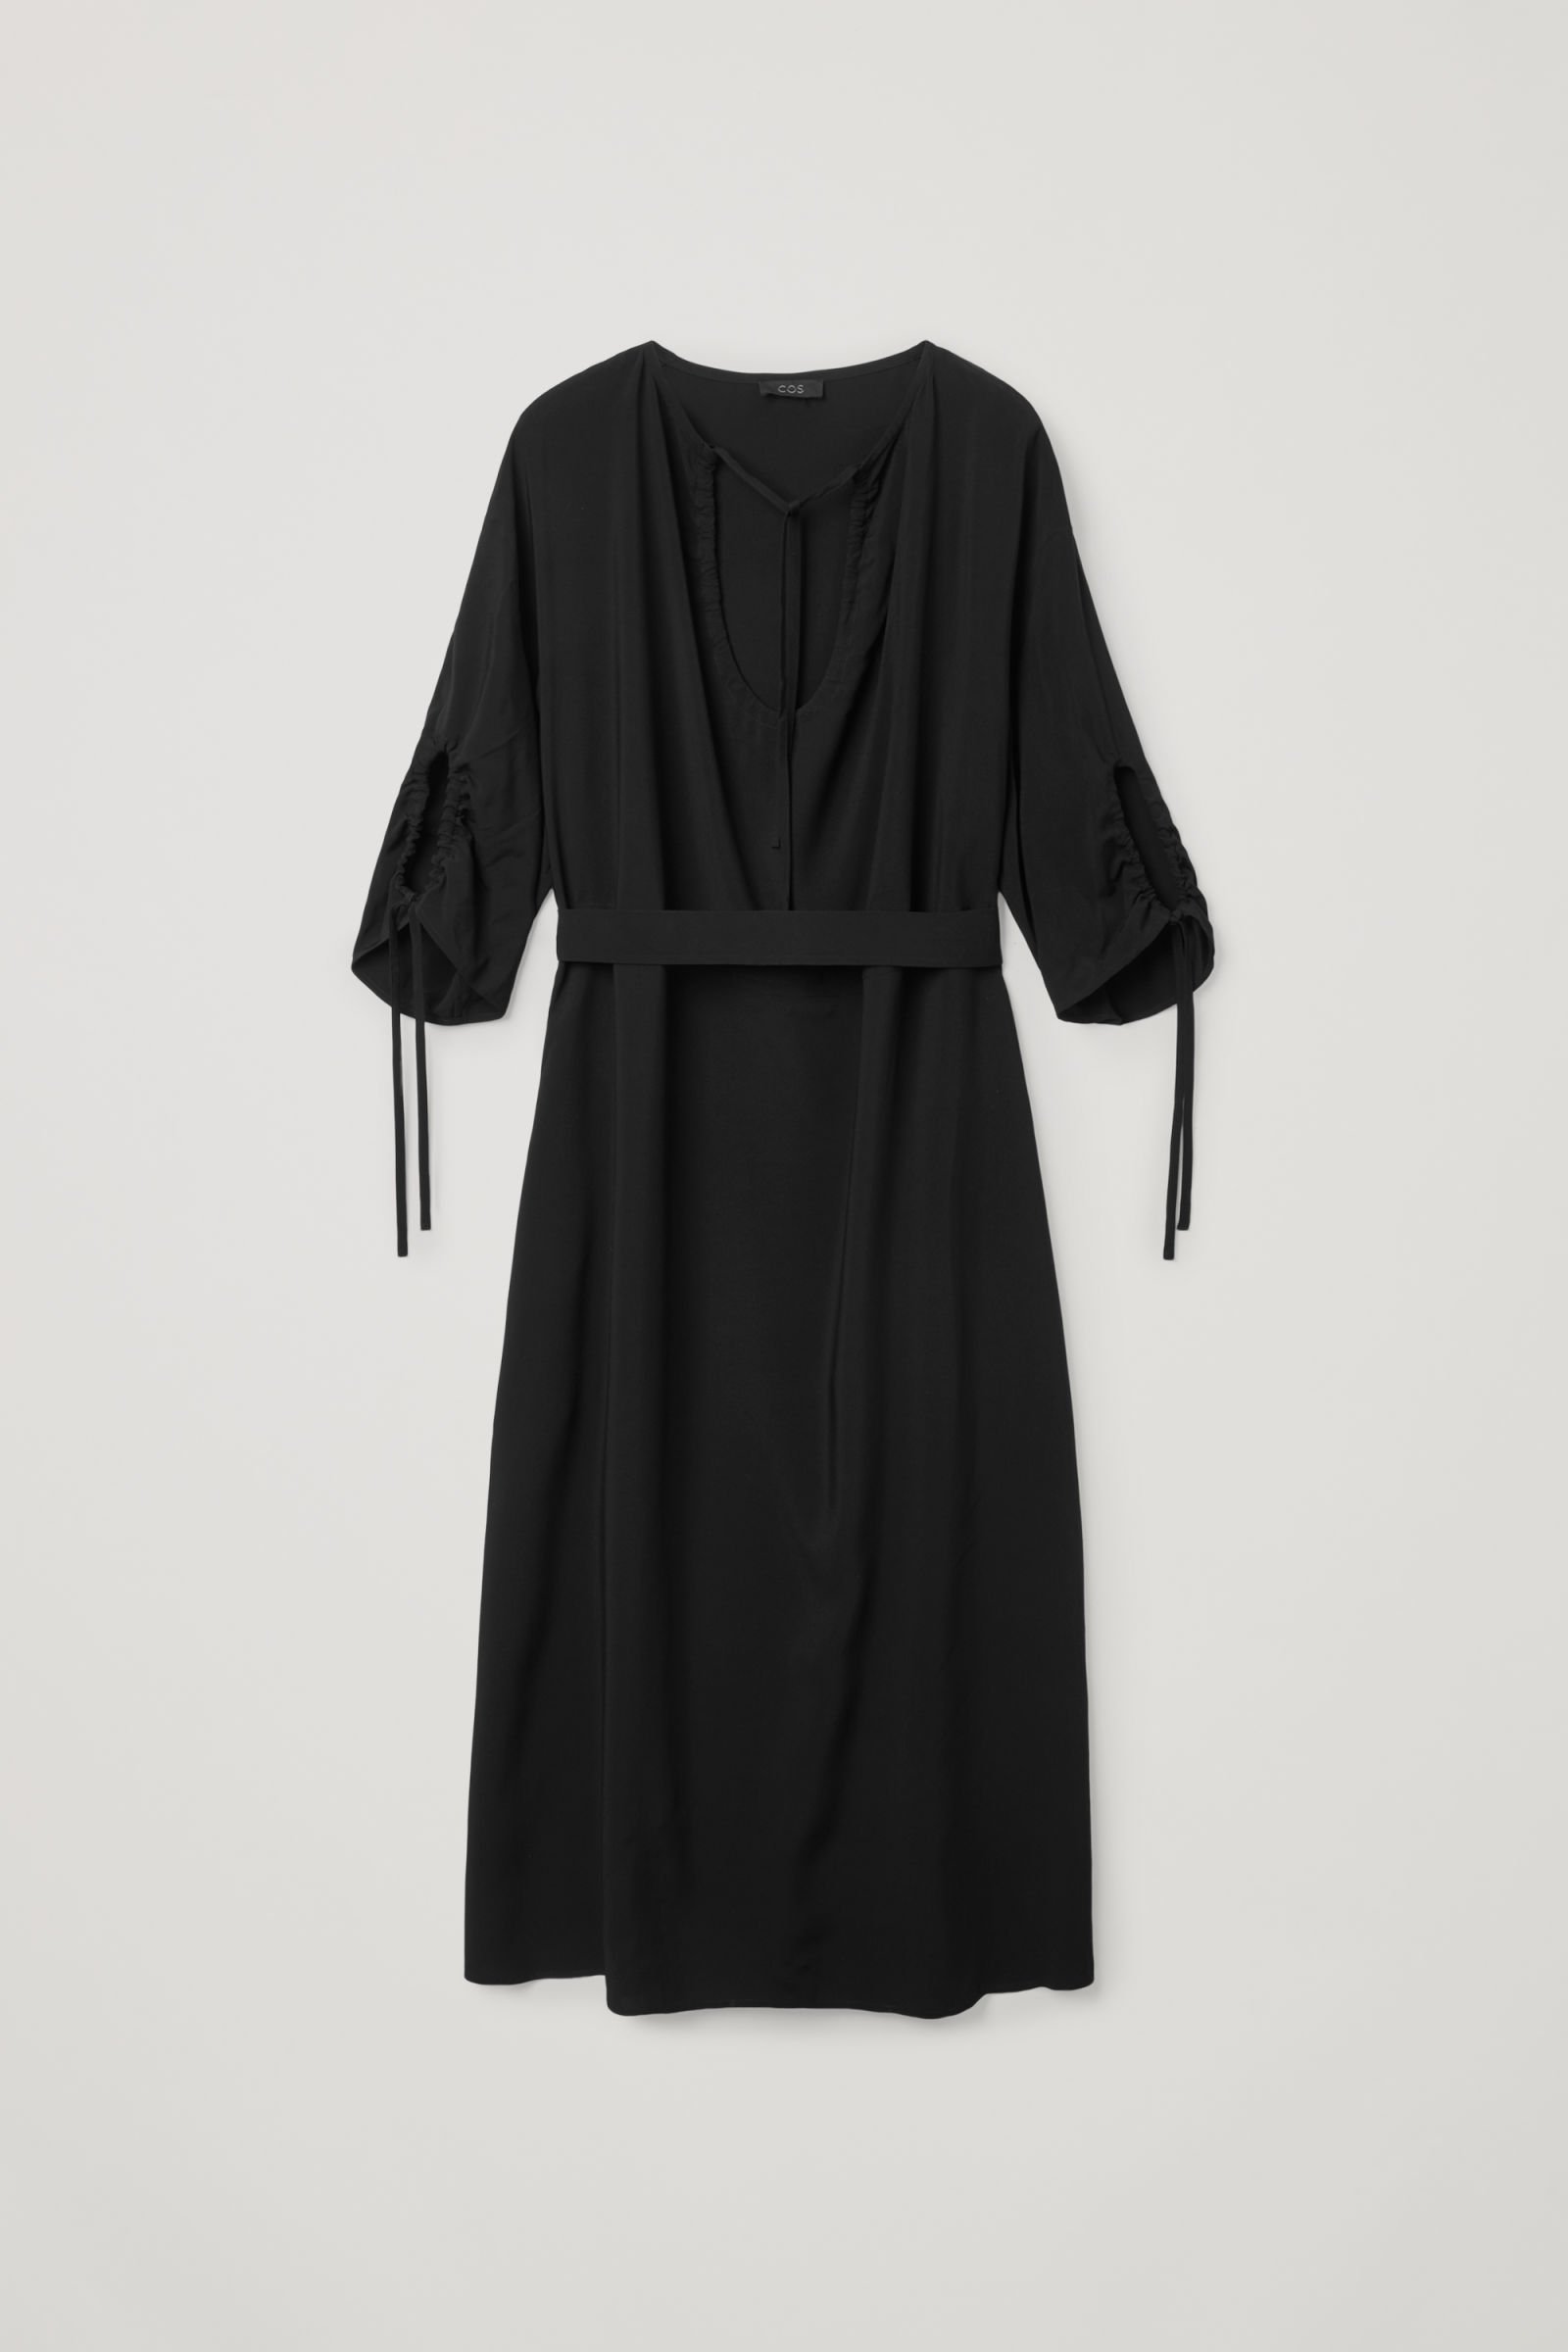 COS Drawstring Dress With Tie Details in black | Endource